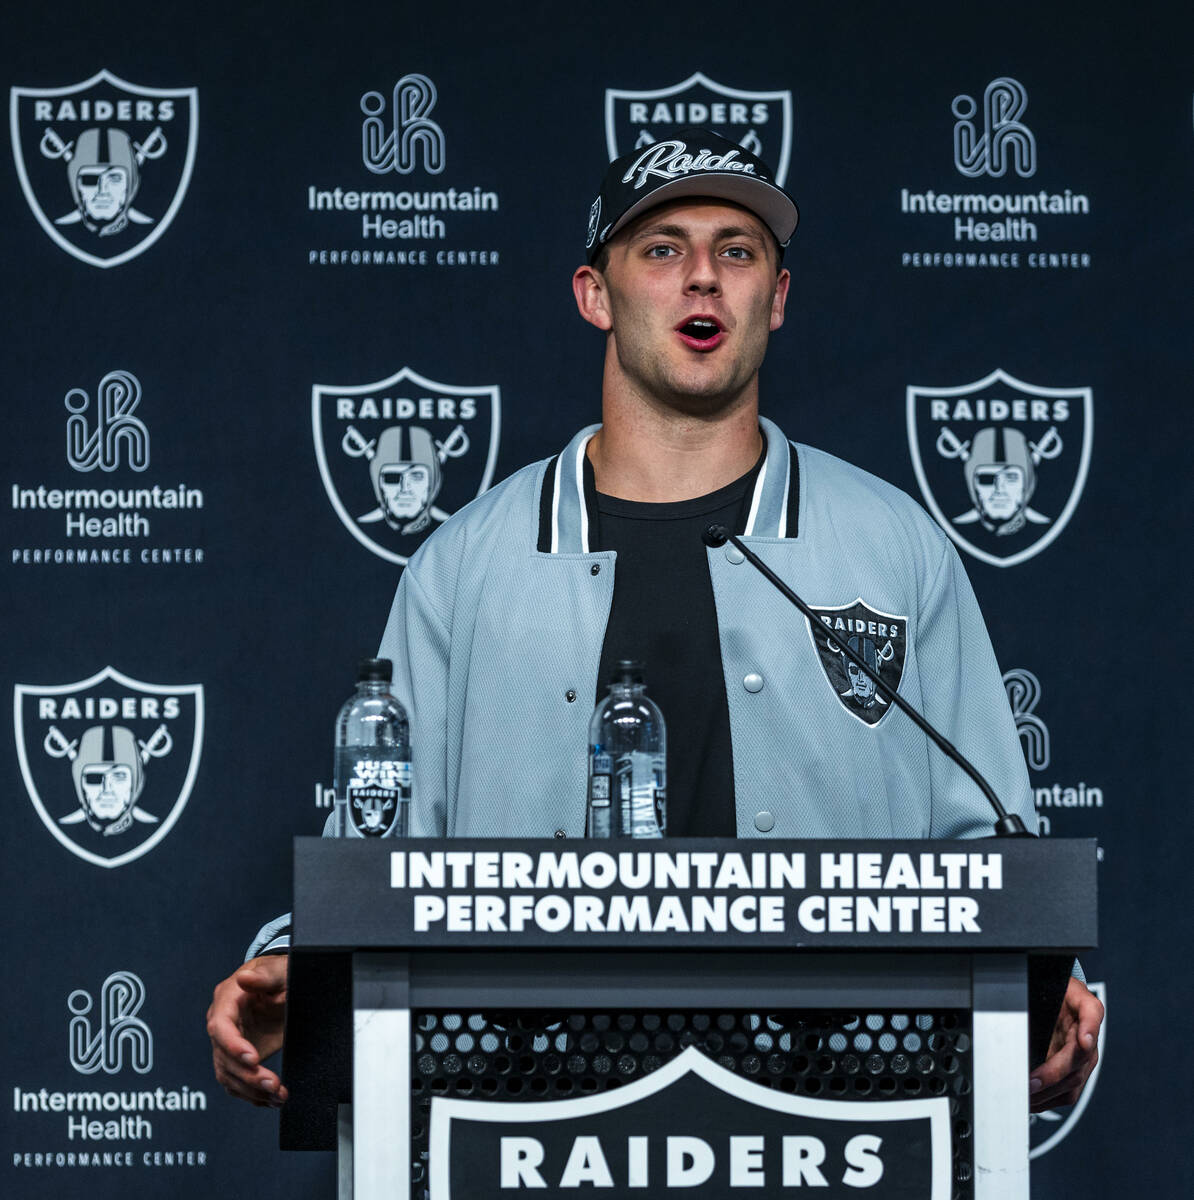 Raiders first round draft pick Brock Bowers speaks during a press conference at the Raiders Hea ...